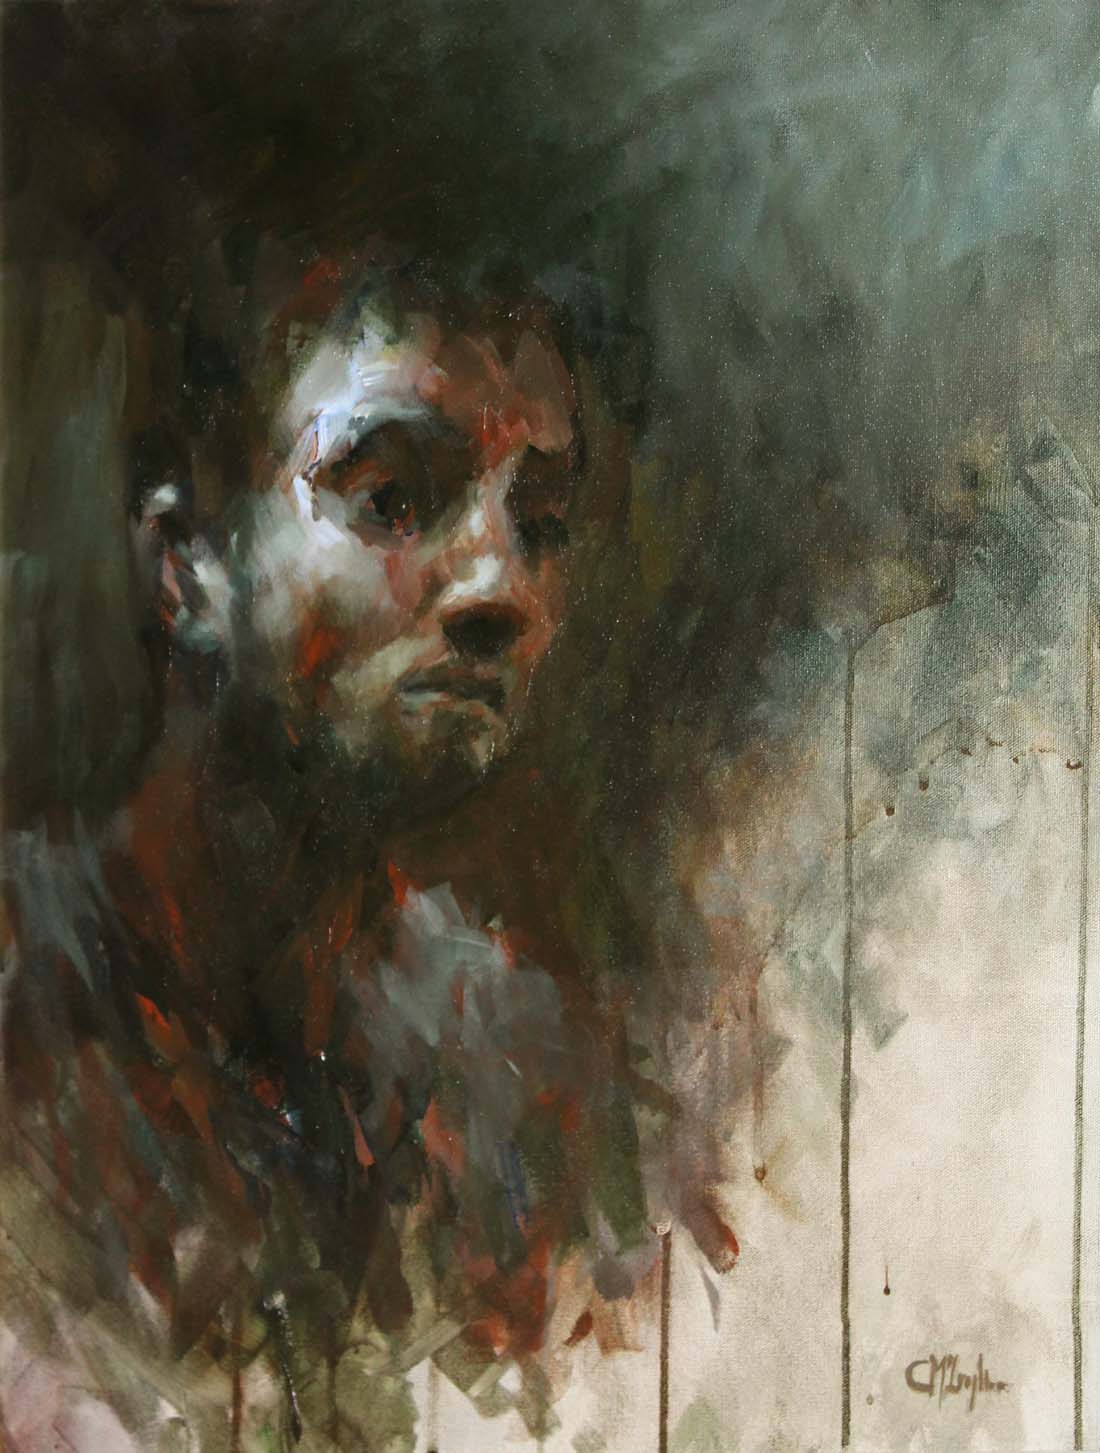 Cian McLoughlin, Contemporary
THE MOURNER 
Oil on canvas, 24" x 18" (61 x 46 cm), signed.